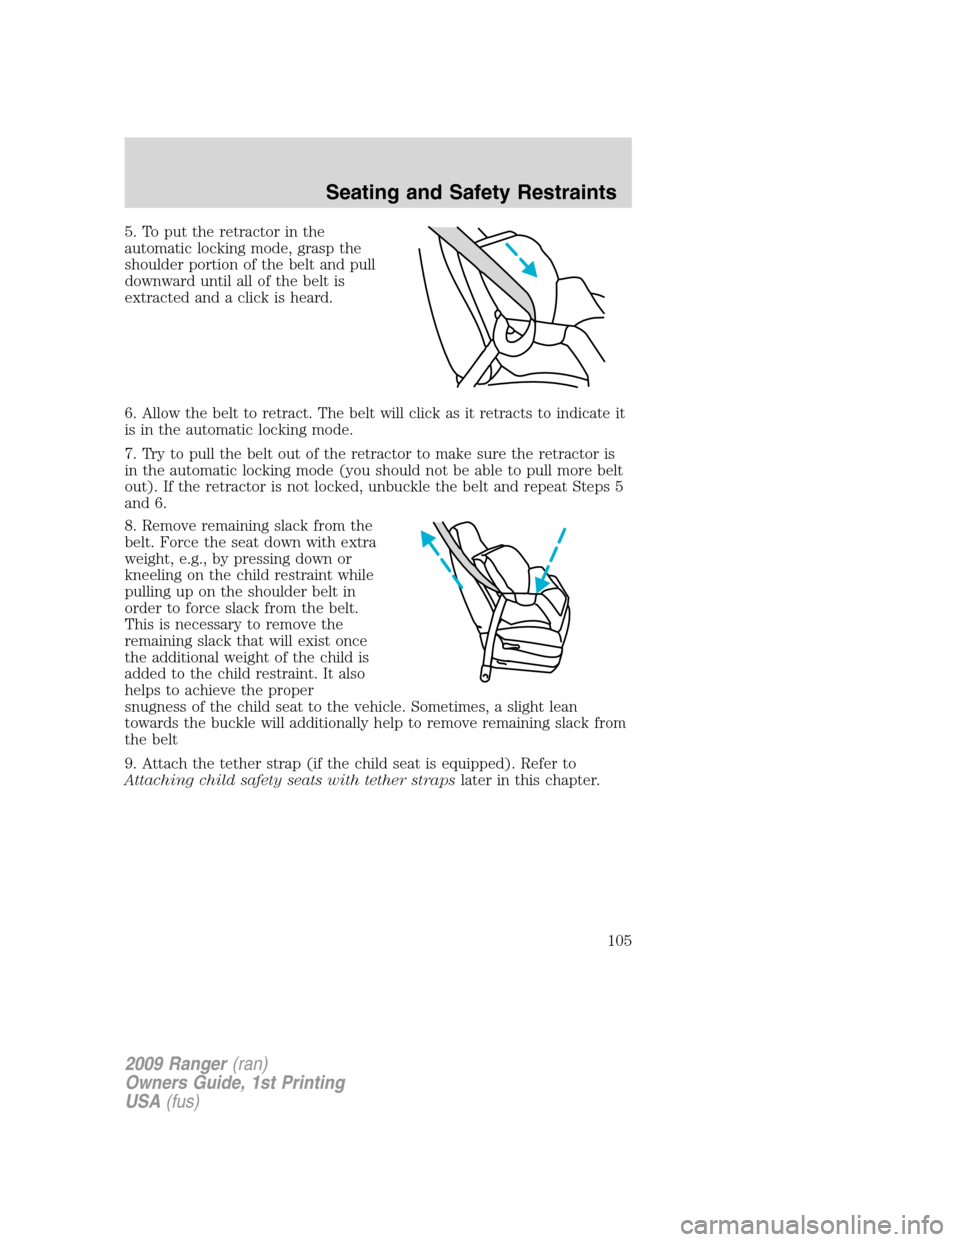 FORD RANGER 2009 2.G Owners Manual 5. To put the retractor in the
automatic locking mode, grasp the
shoulder portion of the belt and pull
downward until all of the belt is
extracted and a click is heard.
6. Allow the belt to retract. T